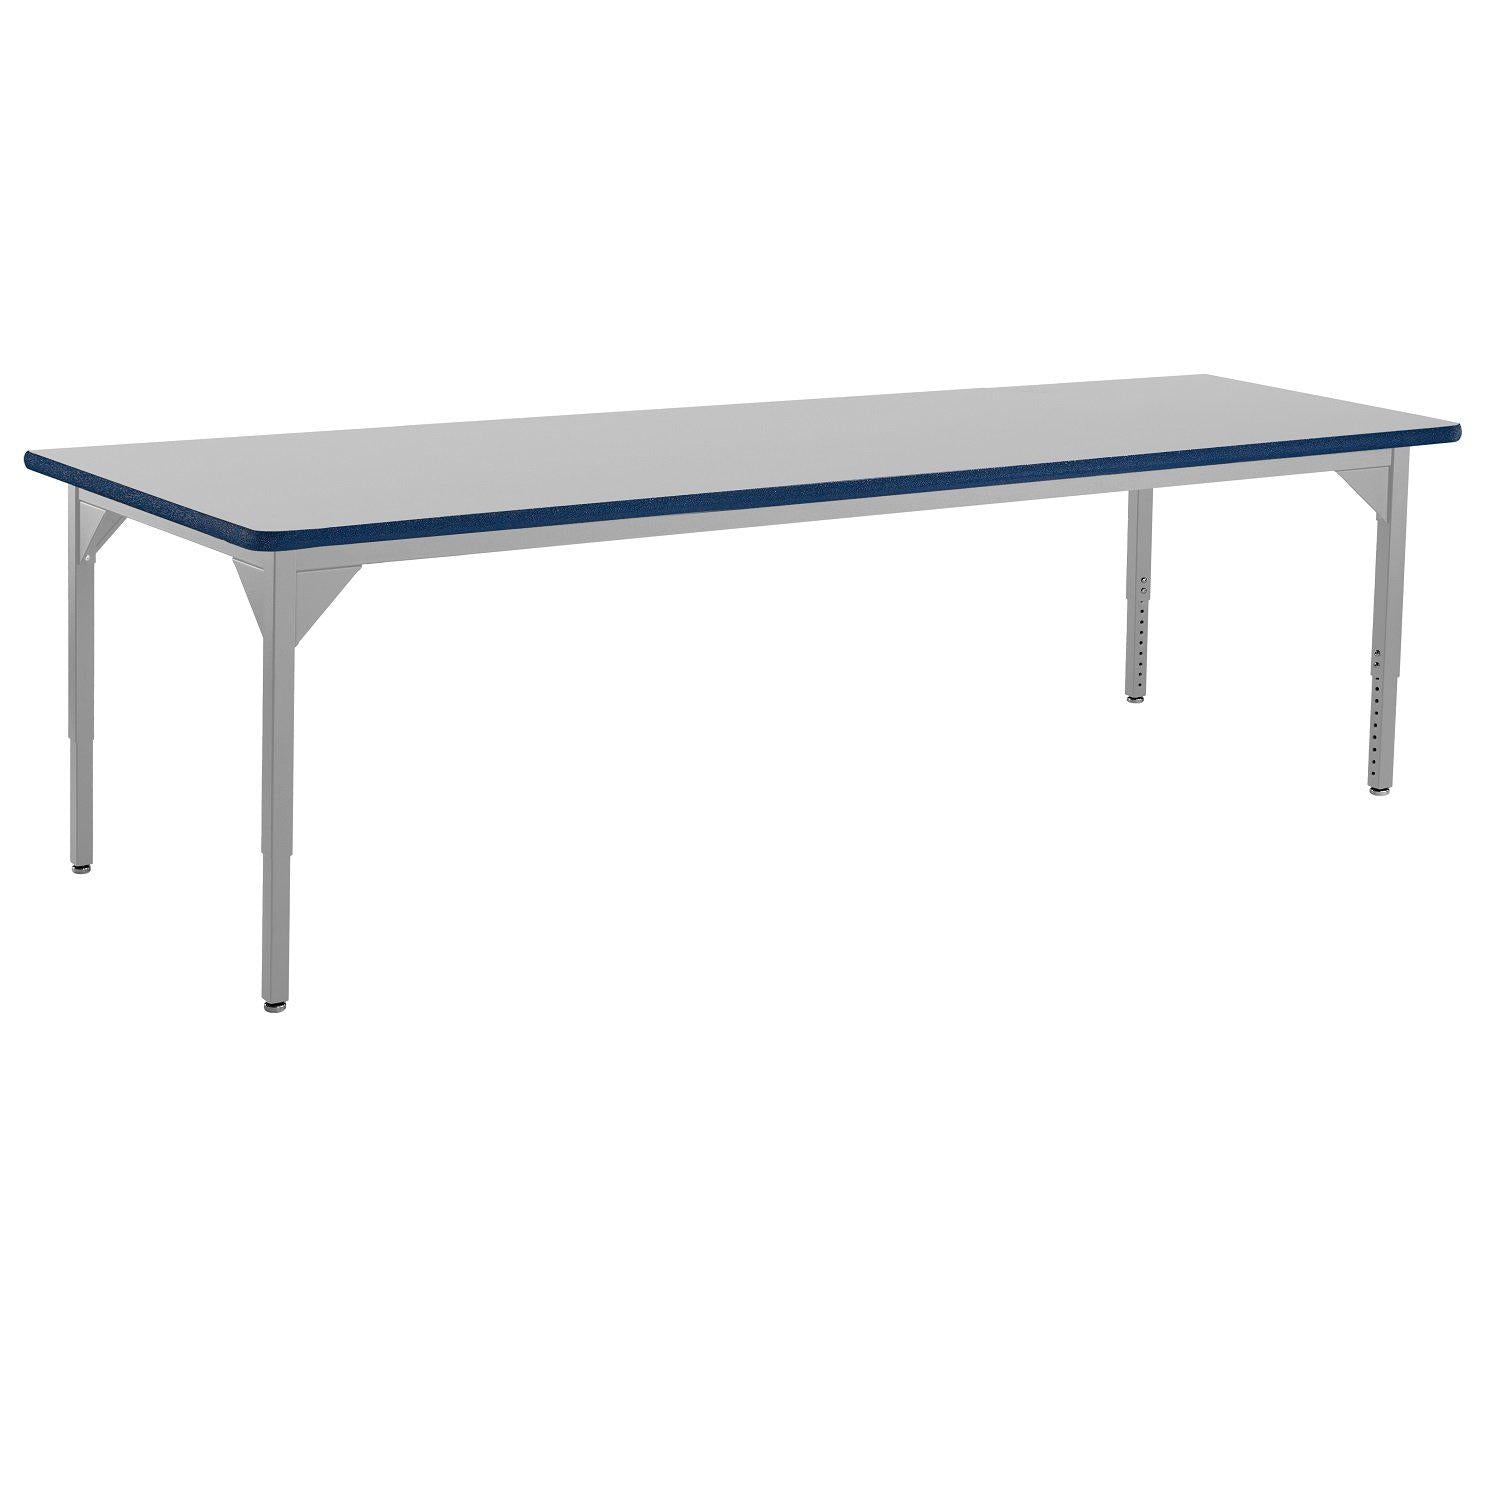 Heavy-Duty Height-Adjustable Utility Table, Soft Grey Frame, 36" x 96", Supreme High-Pressure Laminate Top with Black ProtectEdge